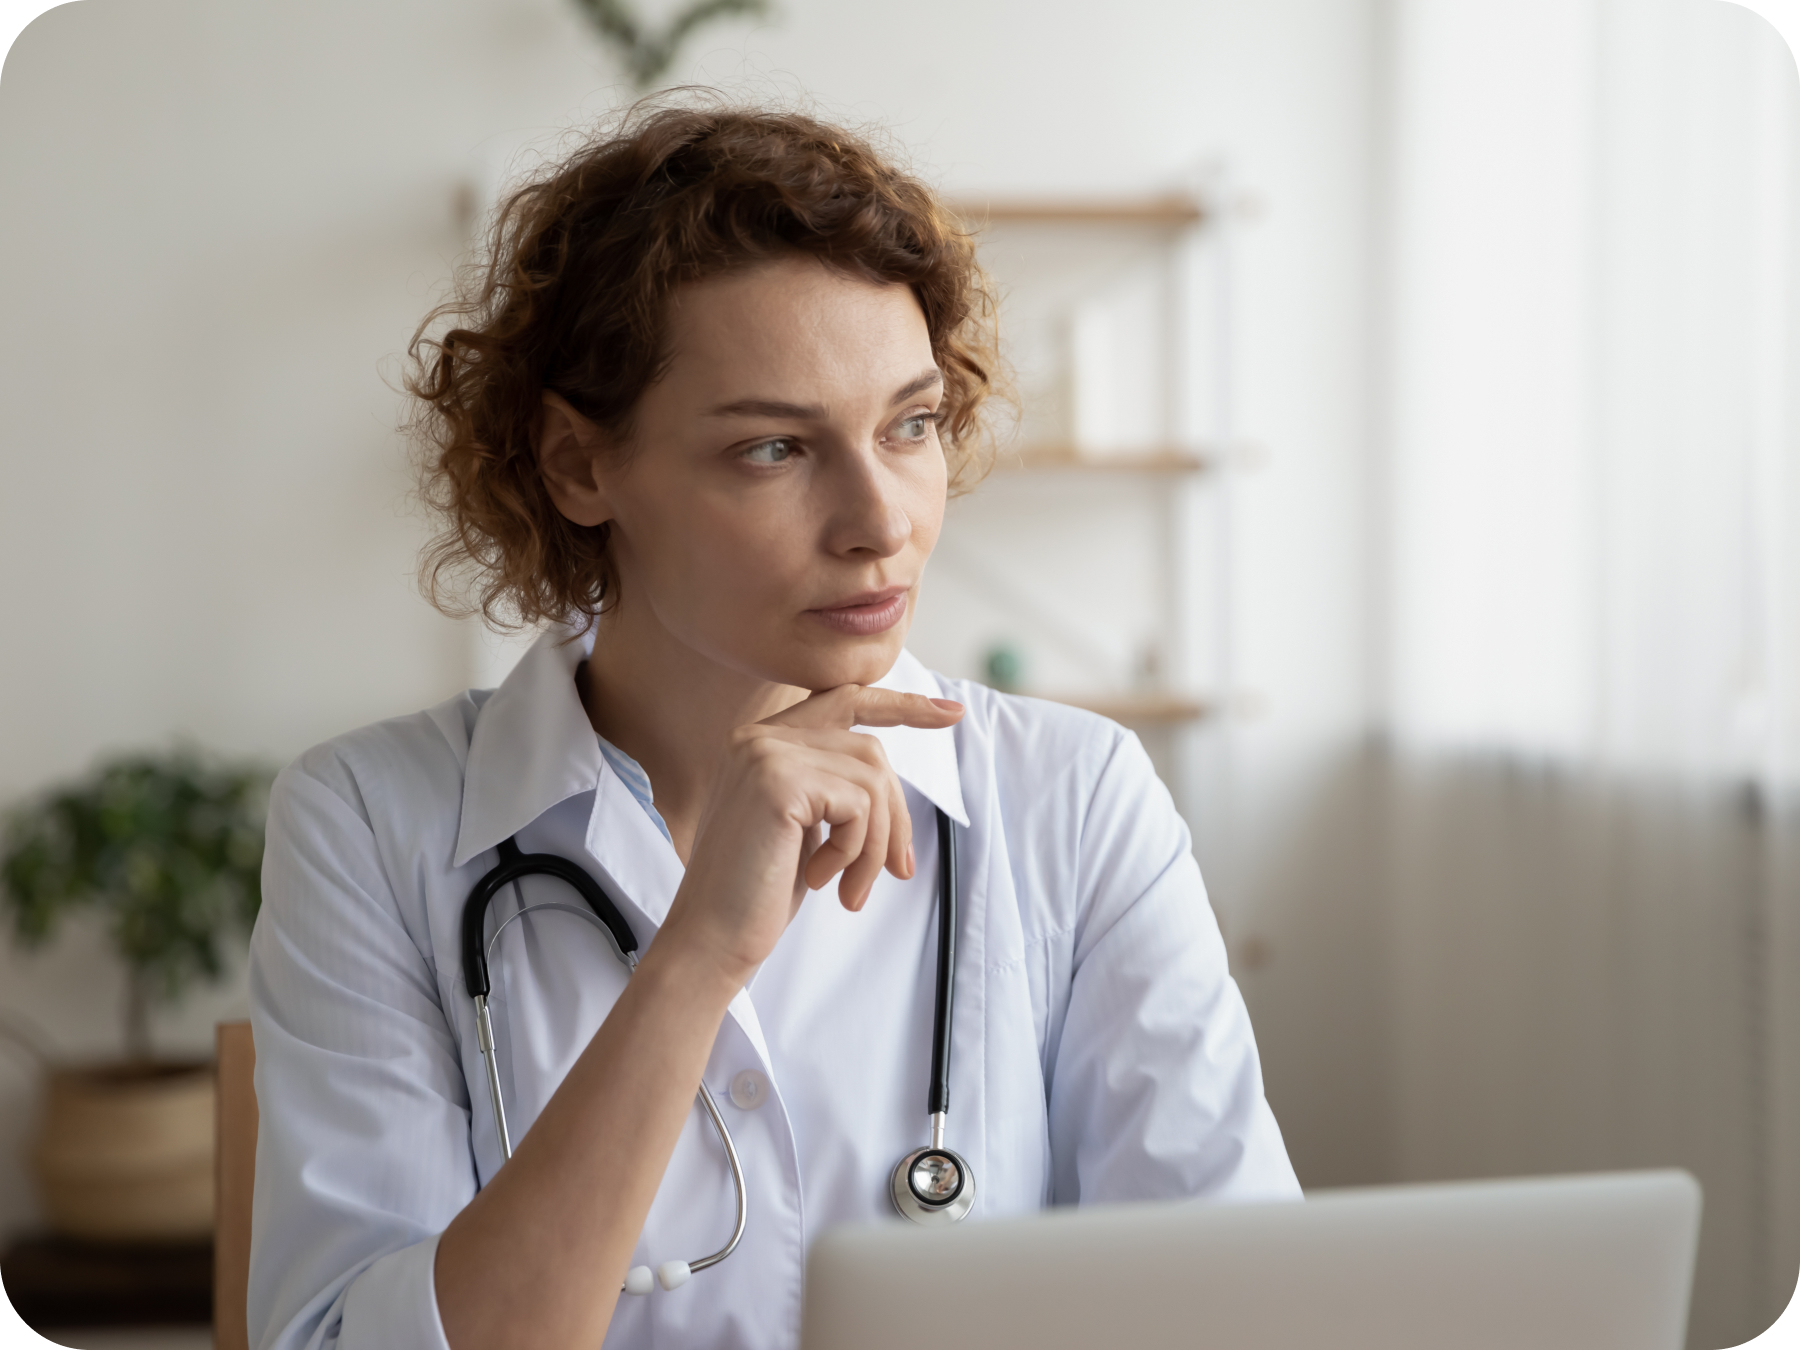 How to choose an EHR-to-EDC solution